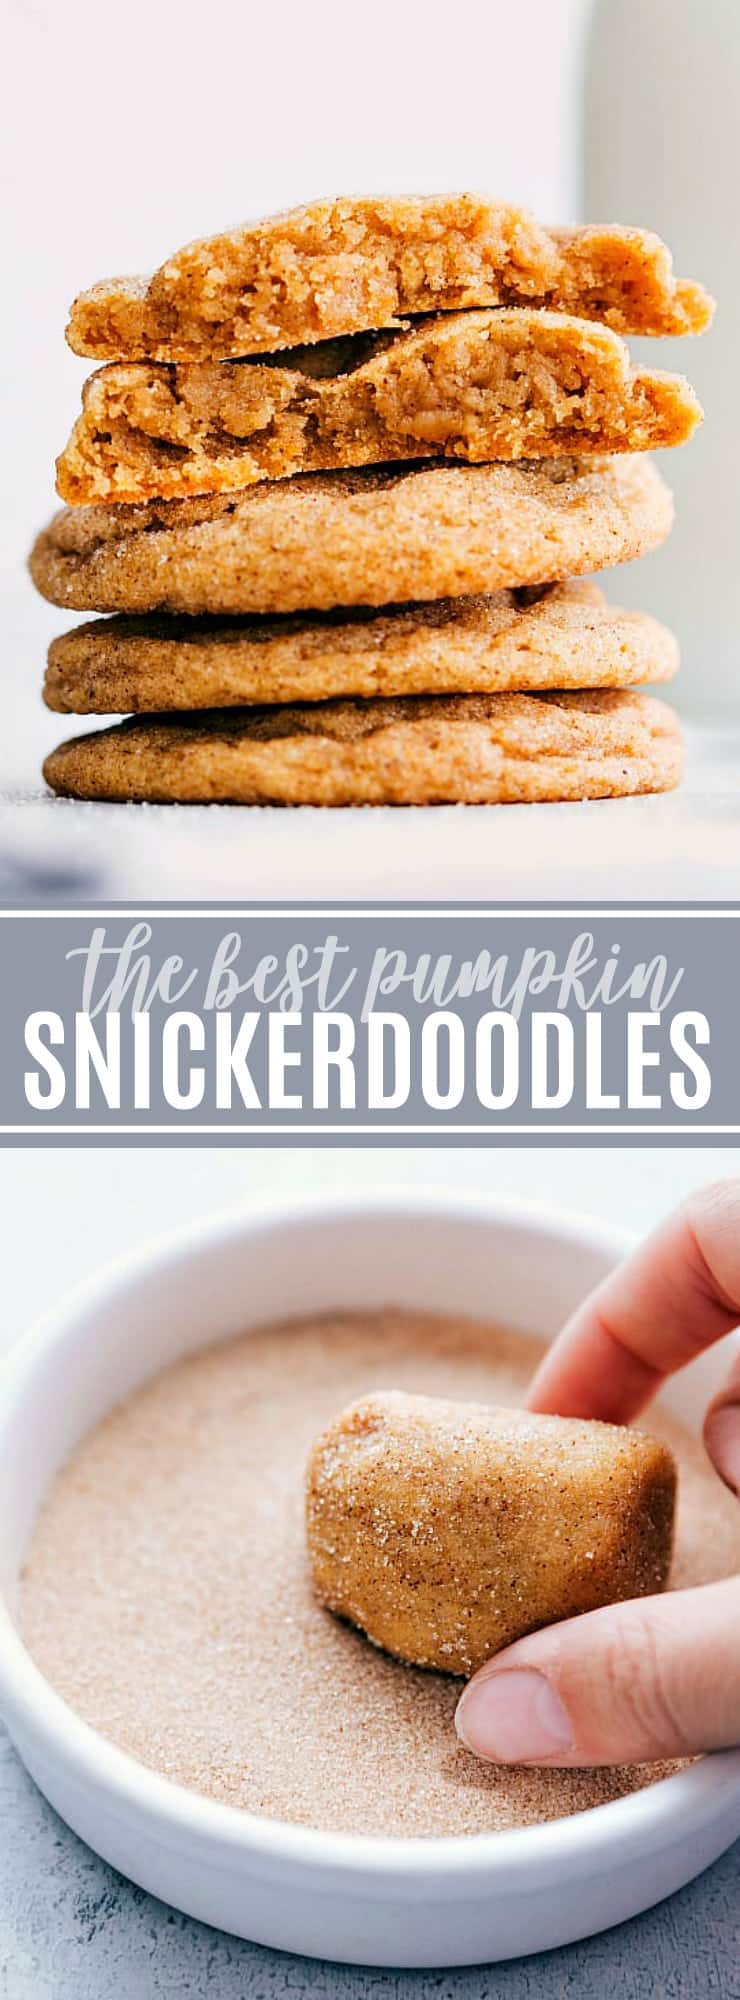 The best ever, soft and chewy, Fall-spiced pumpkin snickerdoodles. Based off of the famous snickerdoodle recipe with ALL 5-star reviews! via chelseasmessyapron.com #pumpkin #dessert #easy #quick #cookies #snickerdoodle #fall #best #ever #cannedpumpkin #pumpkinpiespice